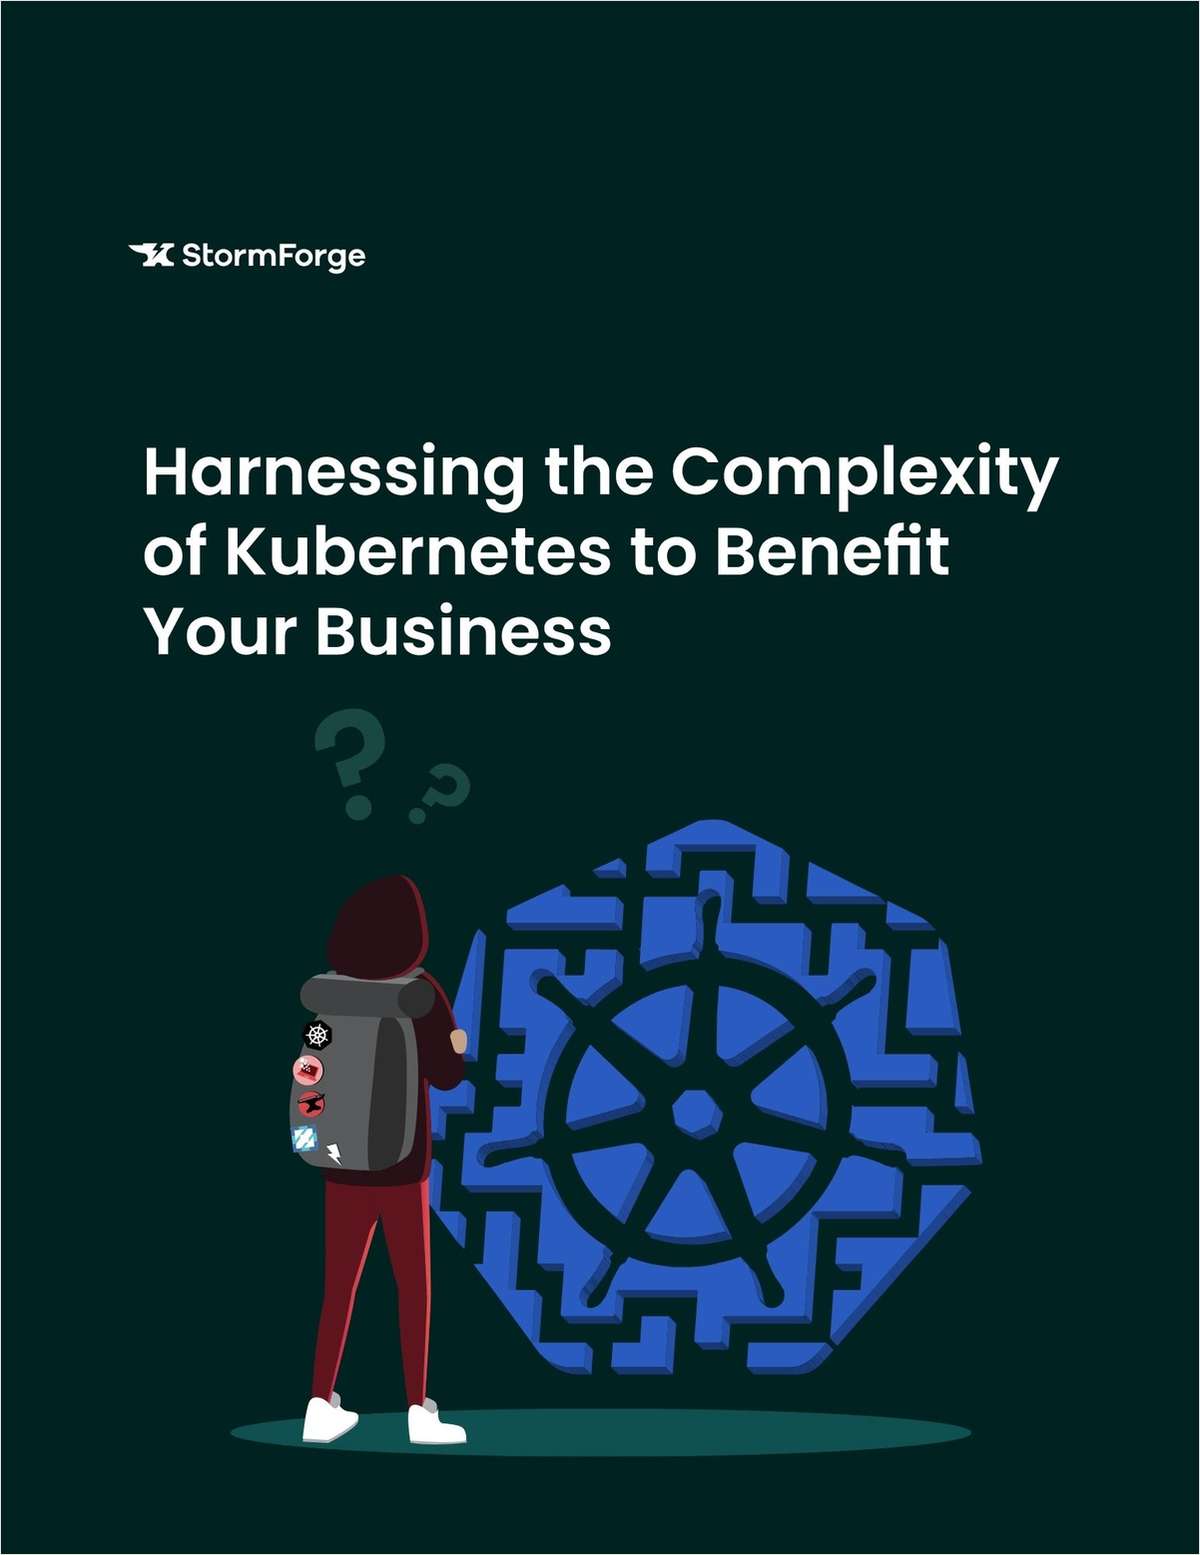 Harnessing the Complexity of Kubernetes to Benefit Your Business